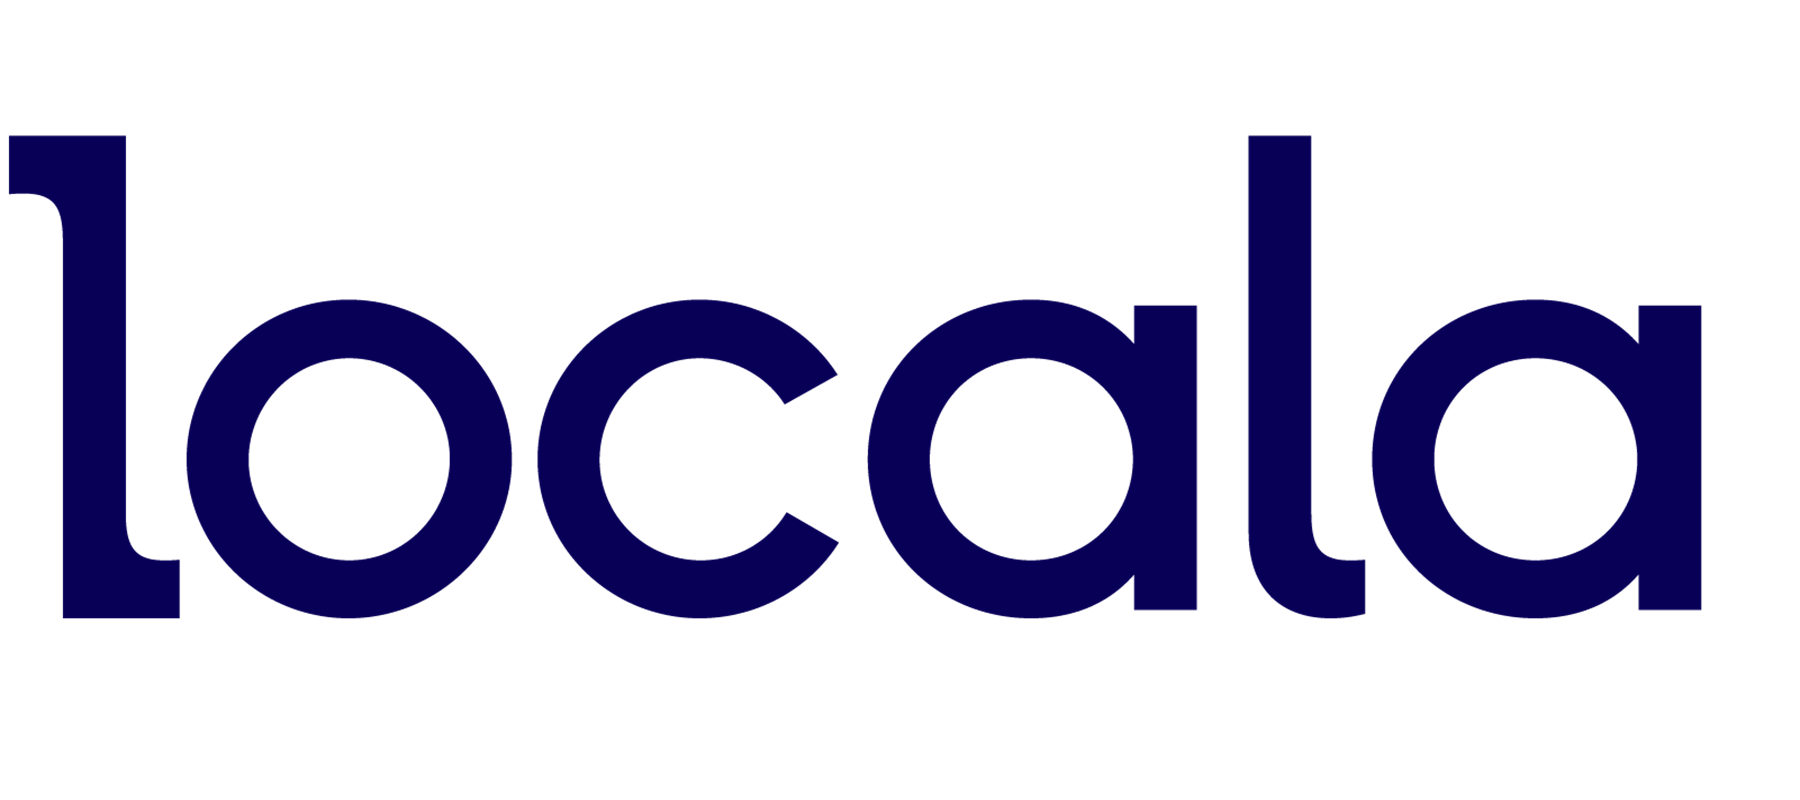 Locala named finalist in Digiday Technology Awards